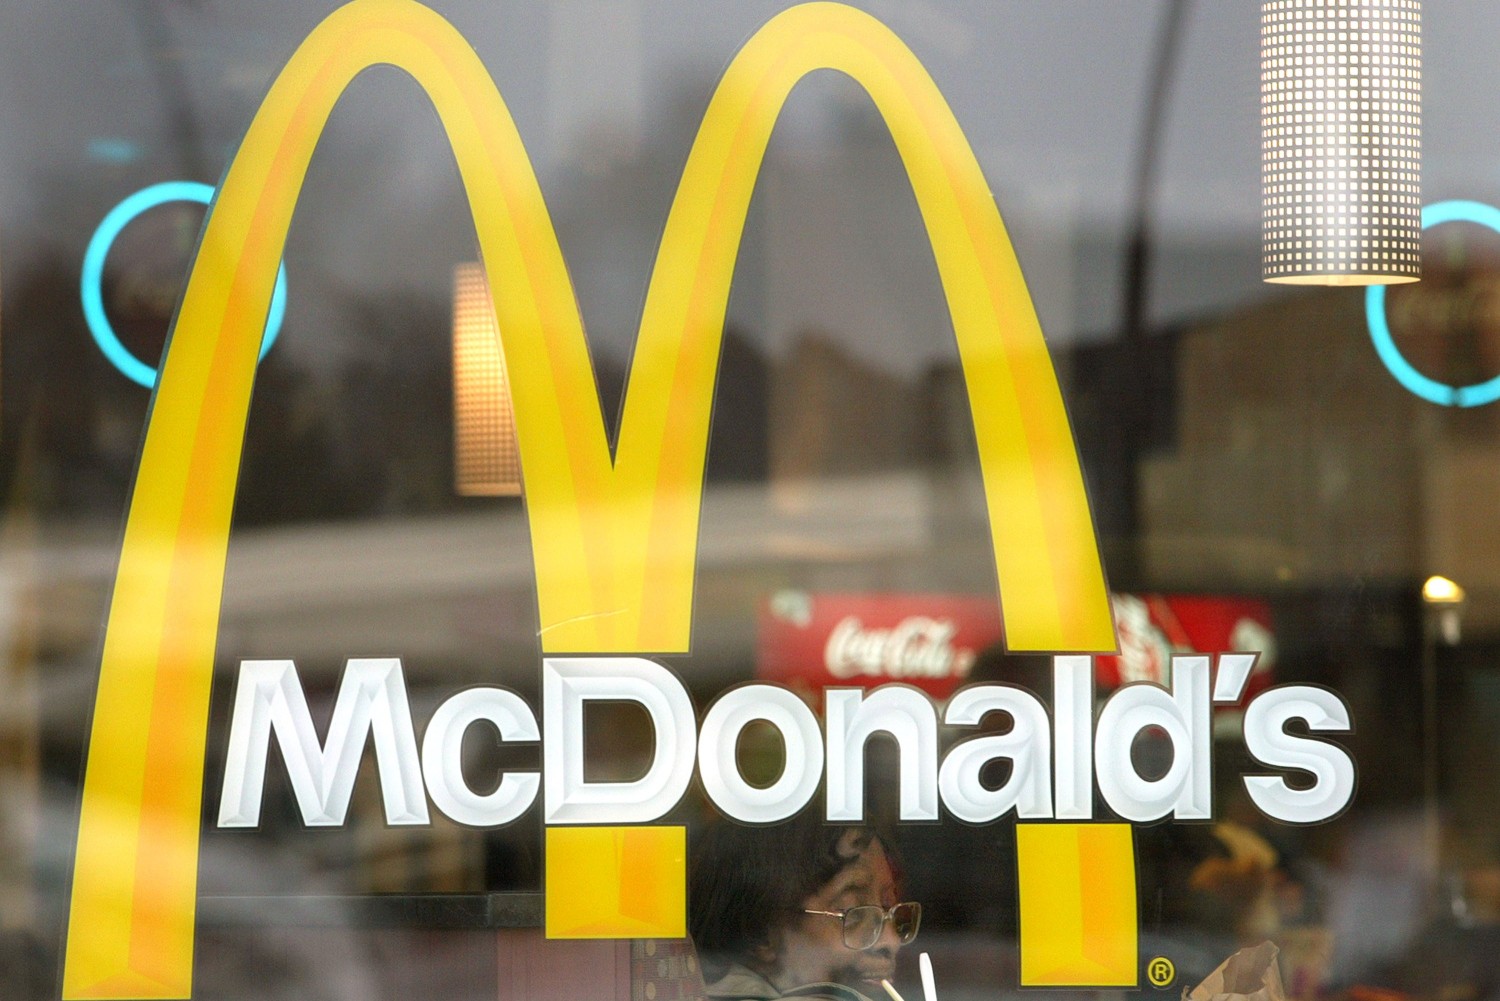 McDonald’s now joins Subway as chains that block customers from using free Wi-Fi to view pornCredit: Getty Images